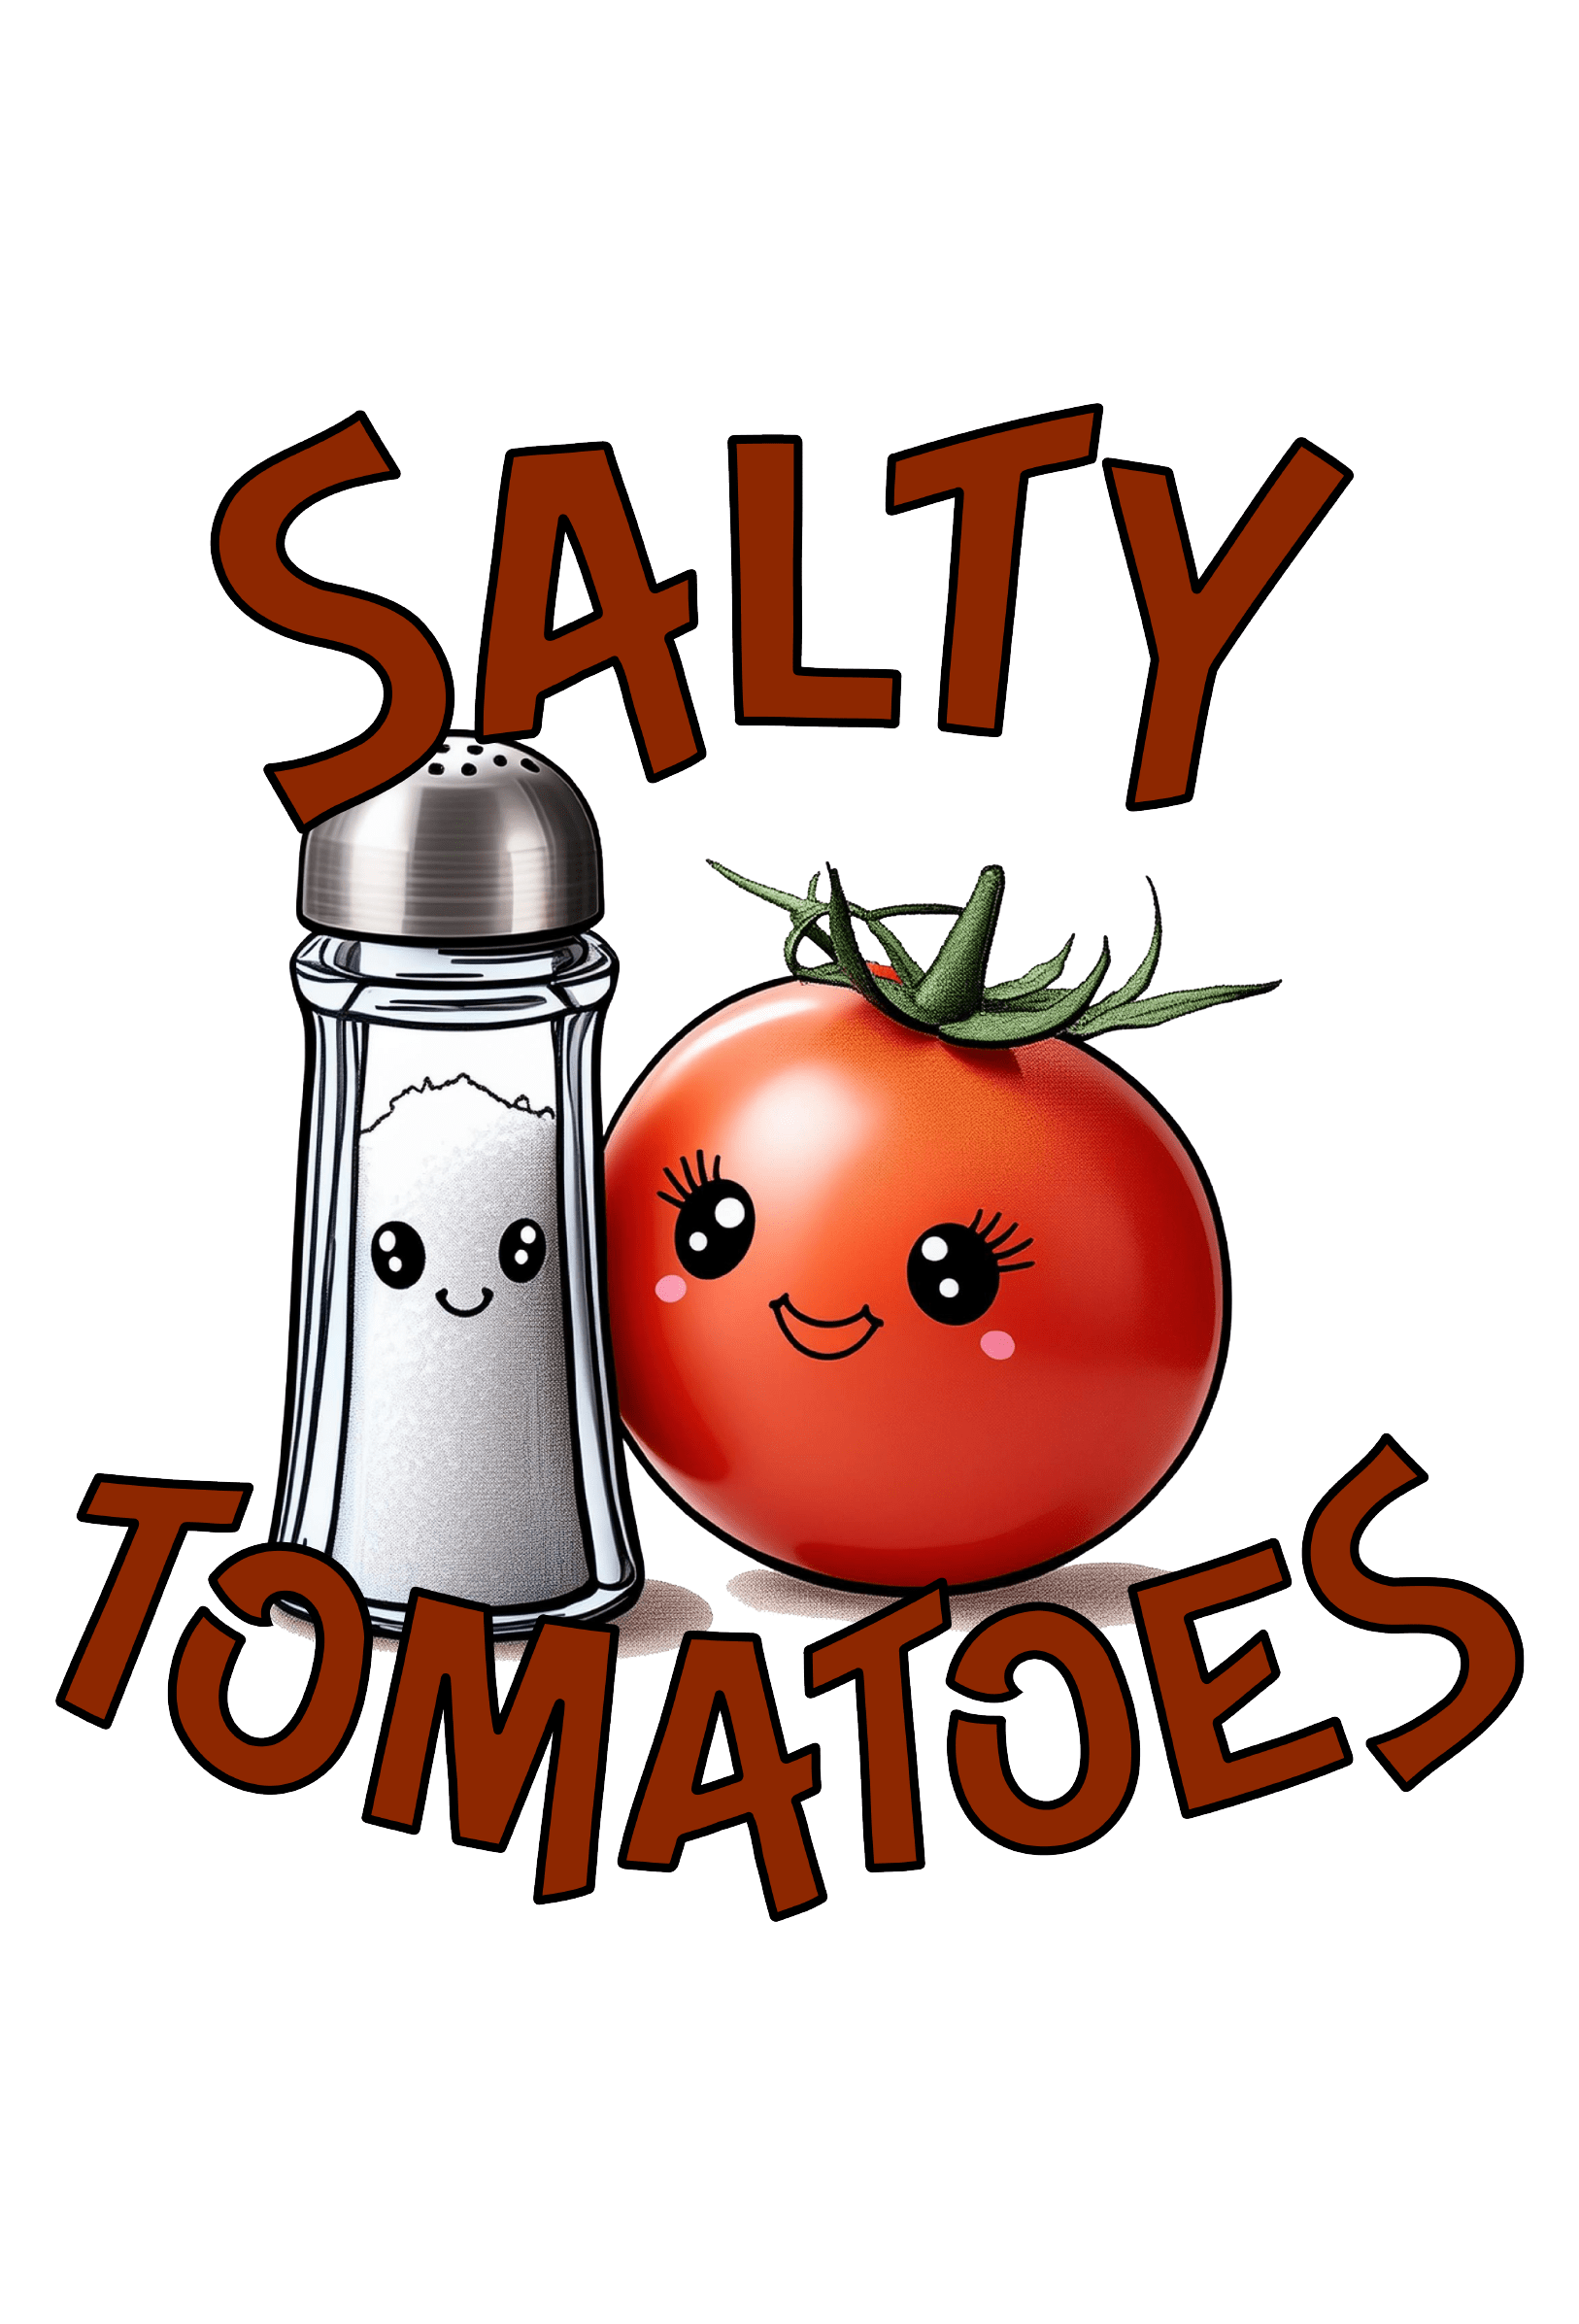 Salty Tomatoes